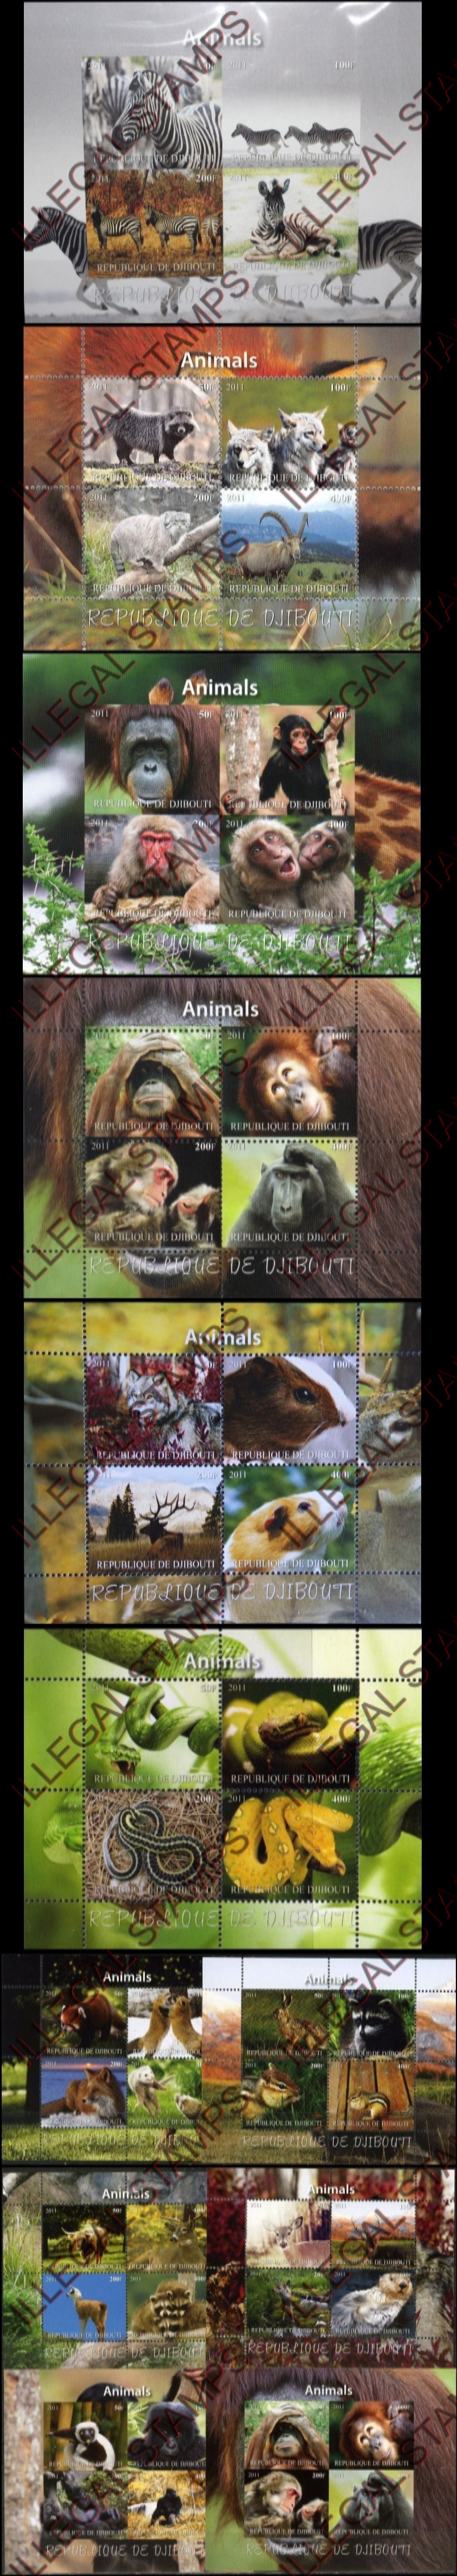 Djibouti 2011 Animals Illegal Stamp Souvenir Sheets of 4 with Picture Backgrounds (Part 1)